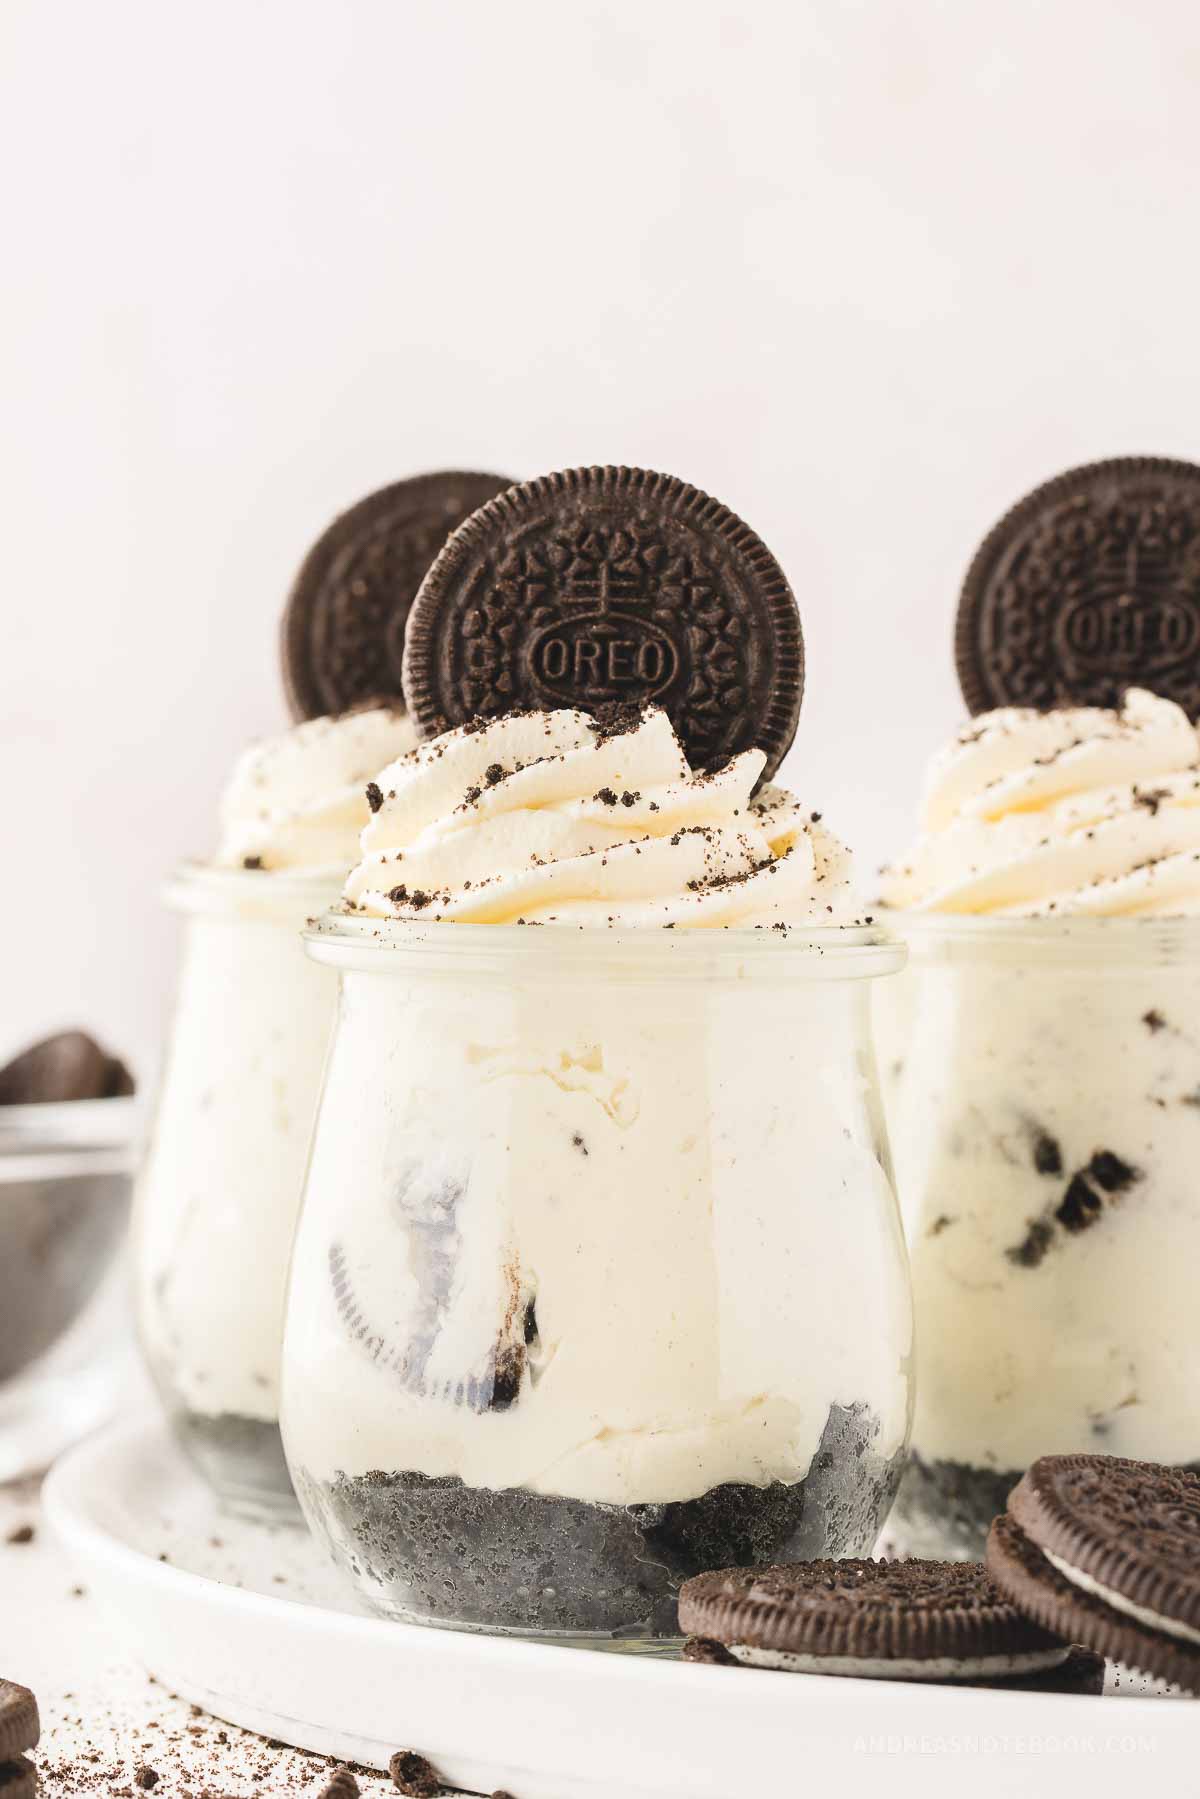 3 jars of oreo cheesecake with a layer of oreo crust, cheesecake and whipped cream with an oreo on top.